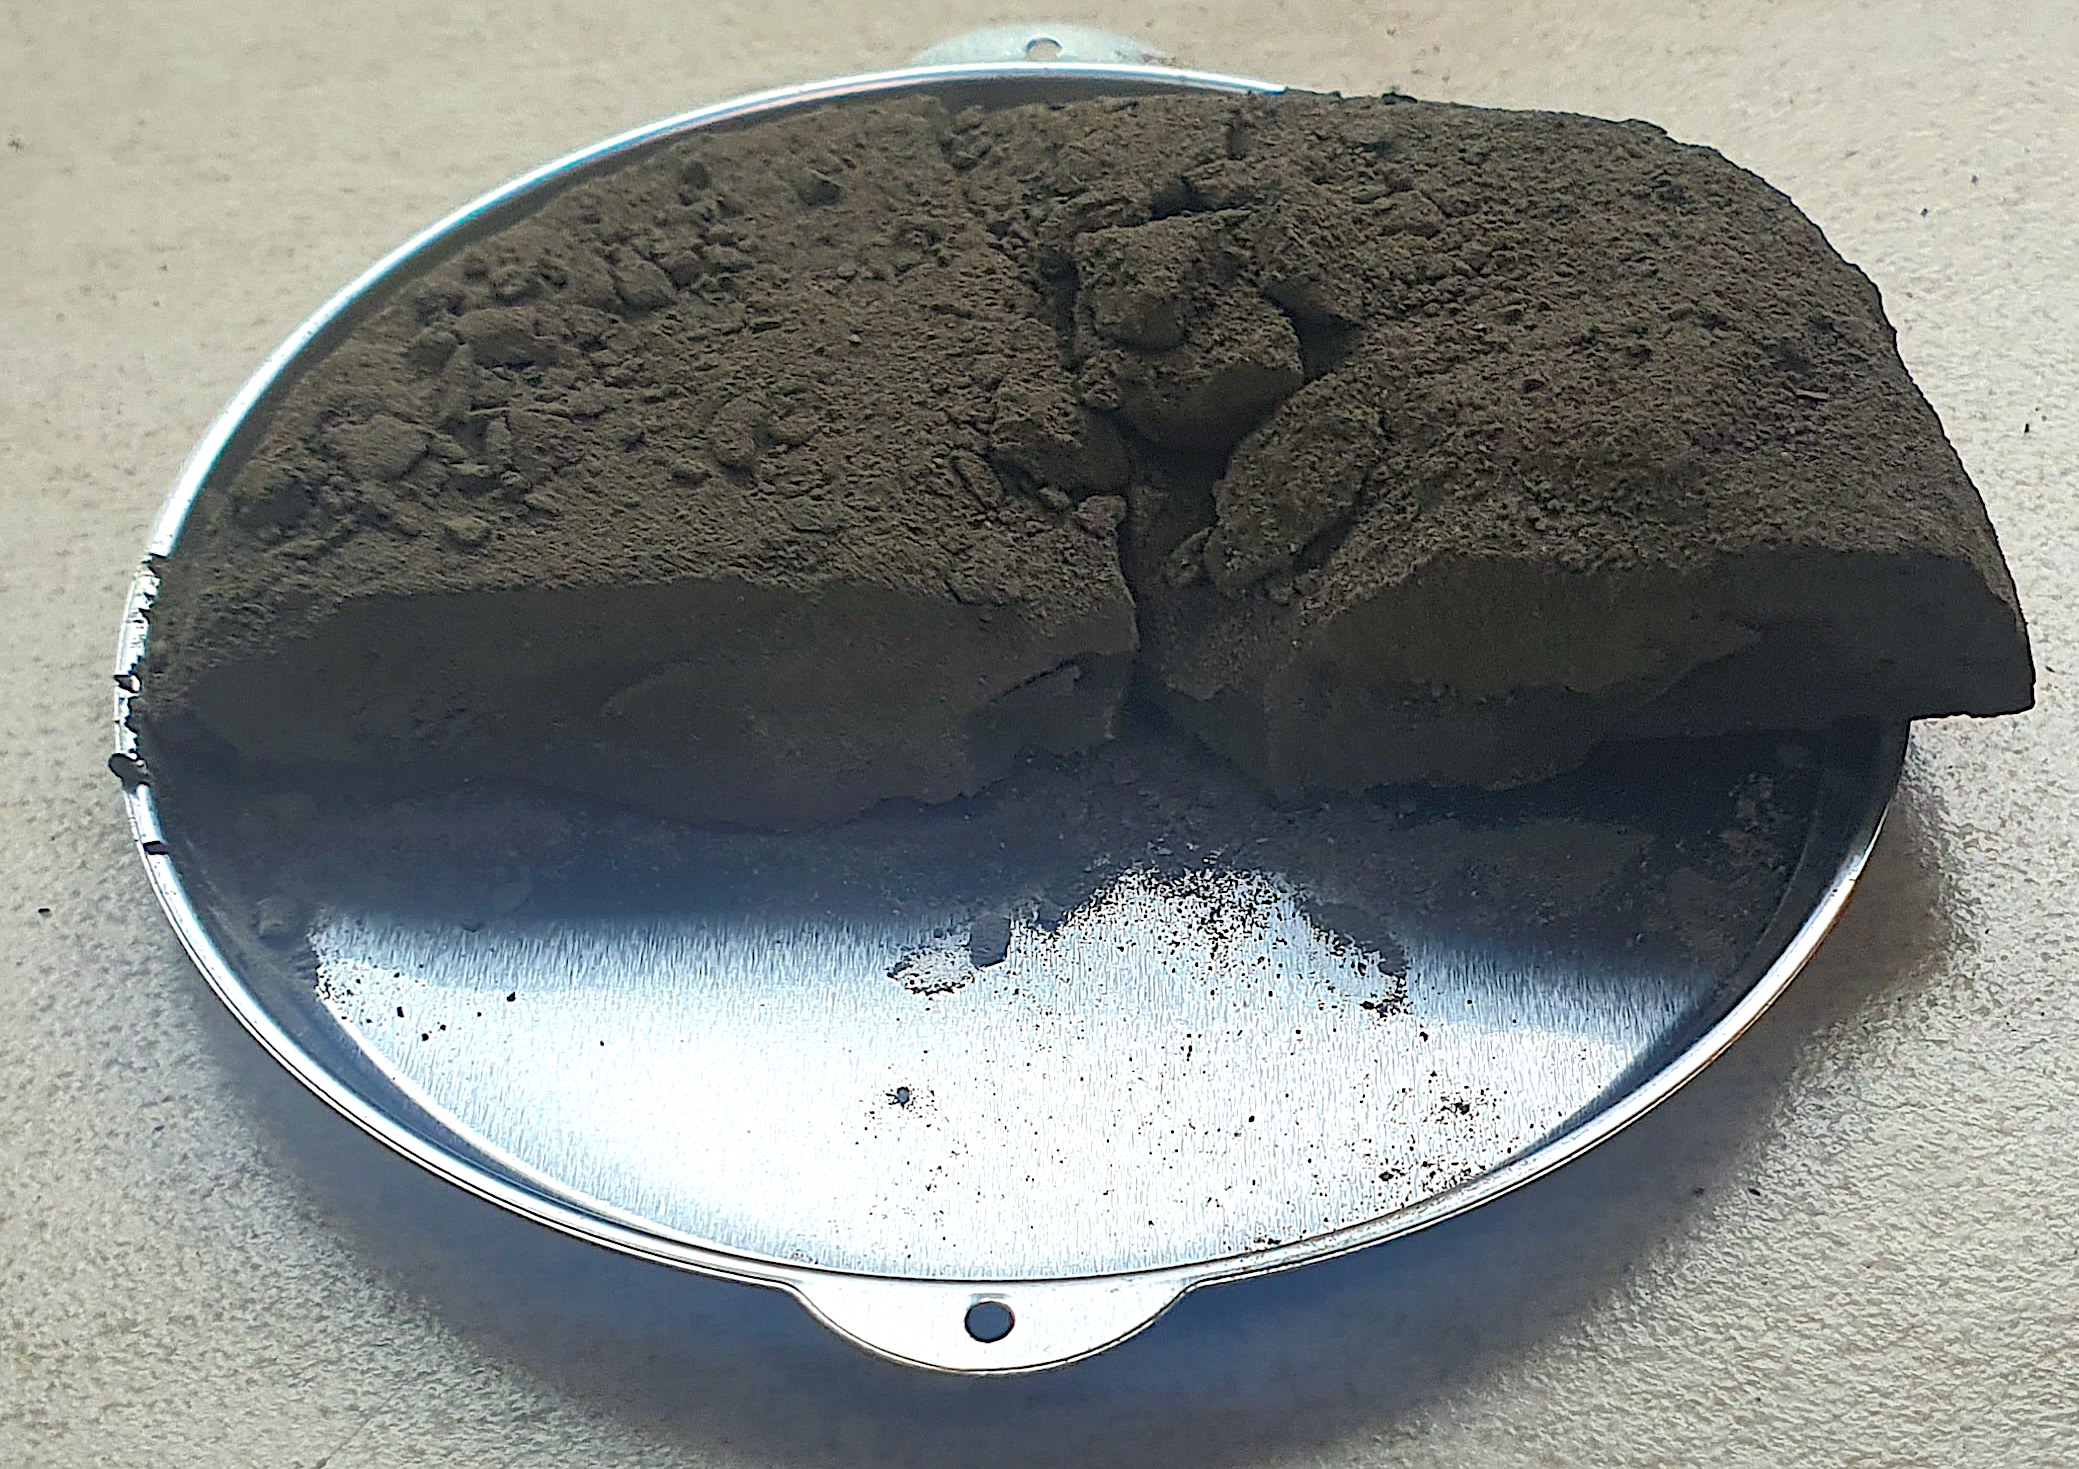 Dried filtration cake residue after completion of solid-liquid separation process.